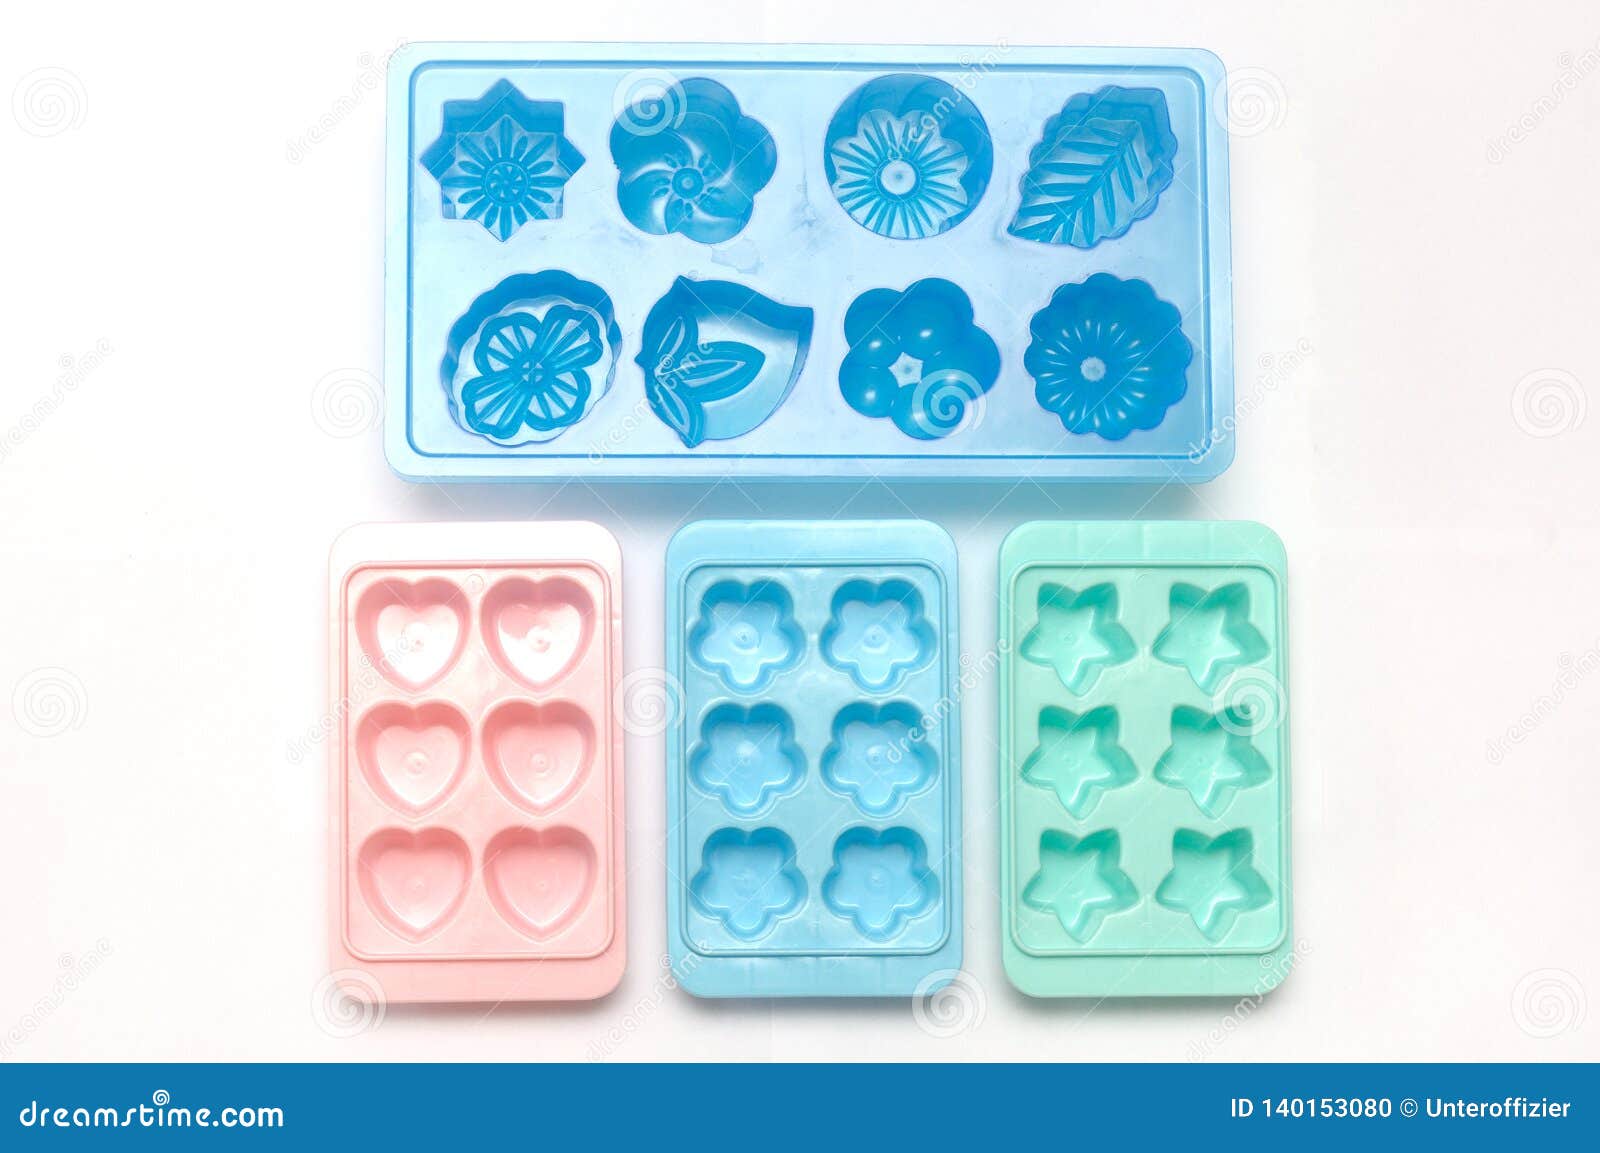 Some Plastic Ice Cube Mold Trays of Different Colors Stock Photo ...